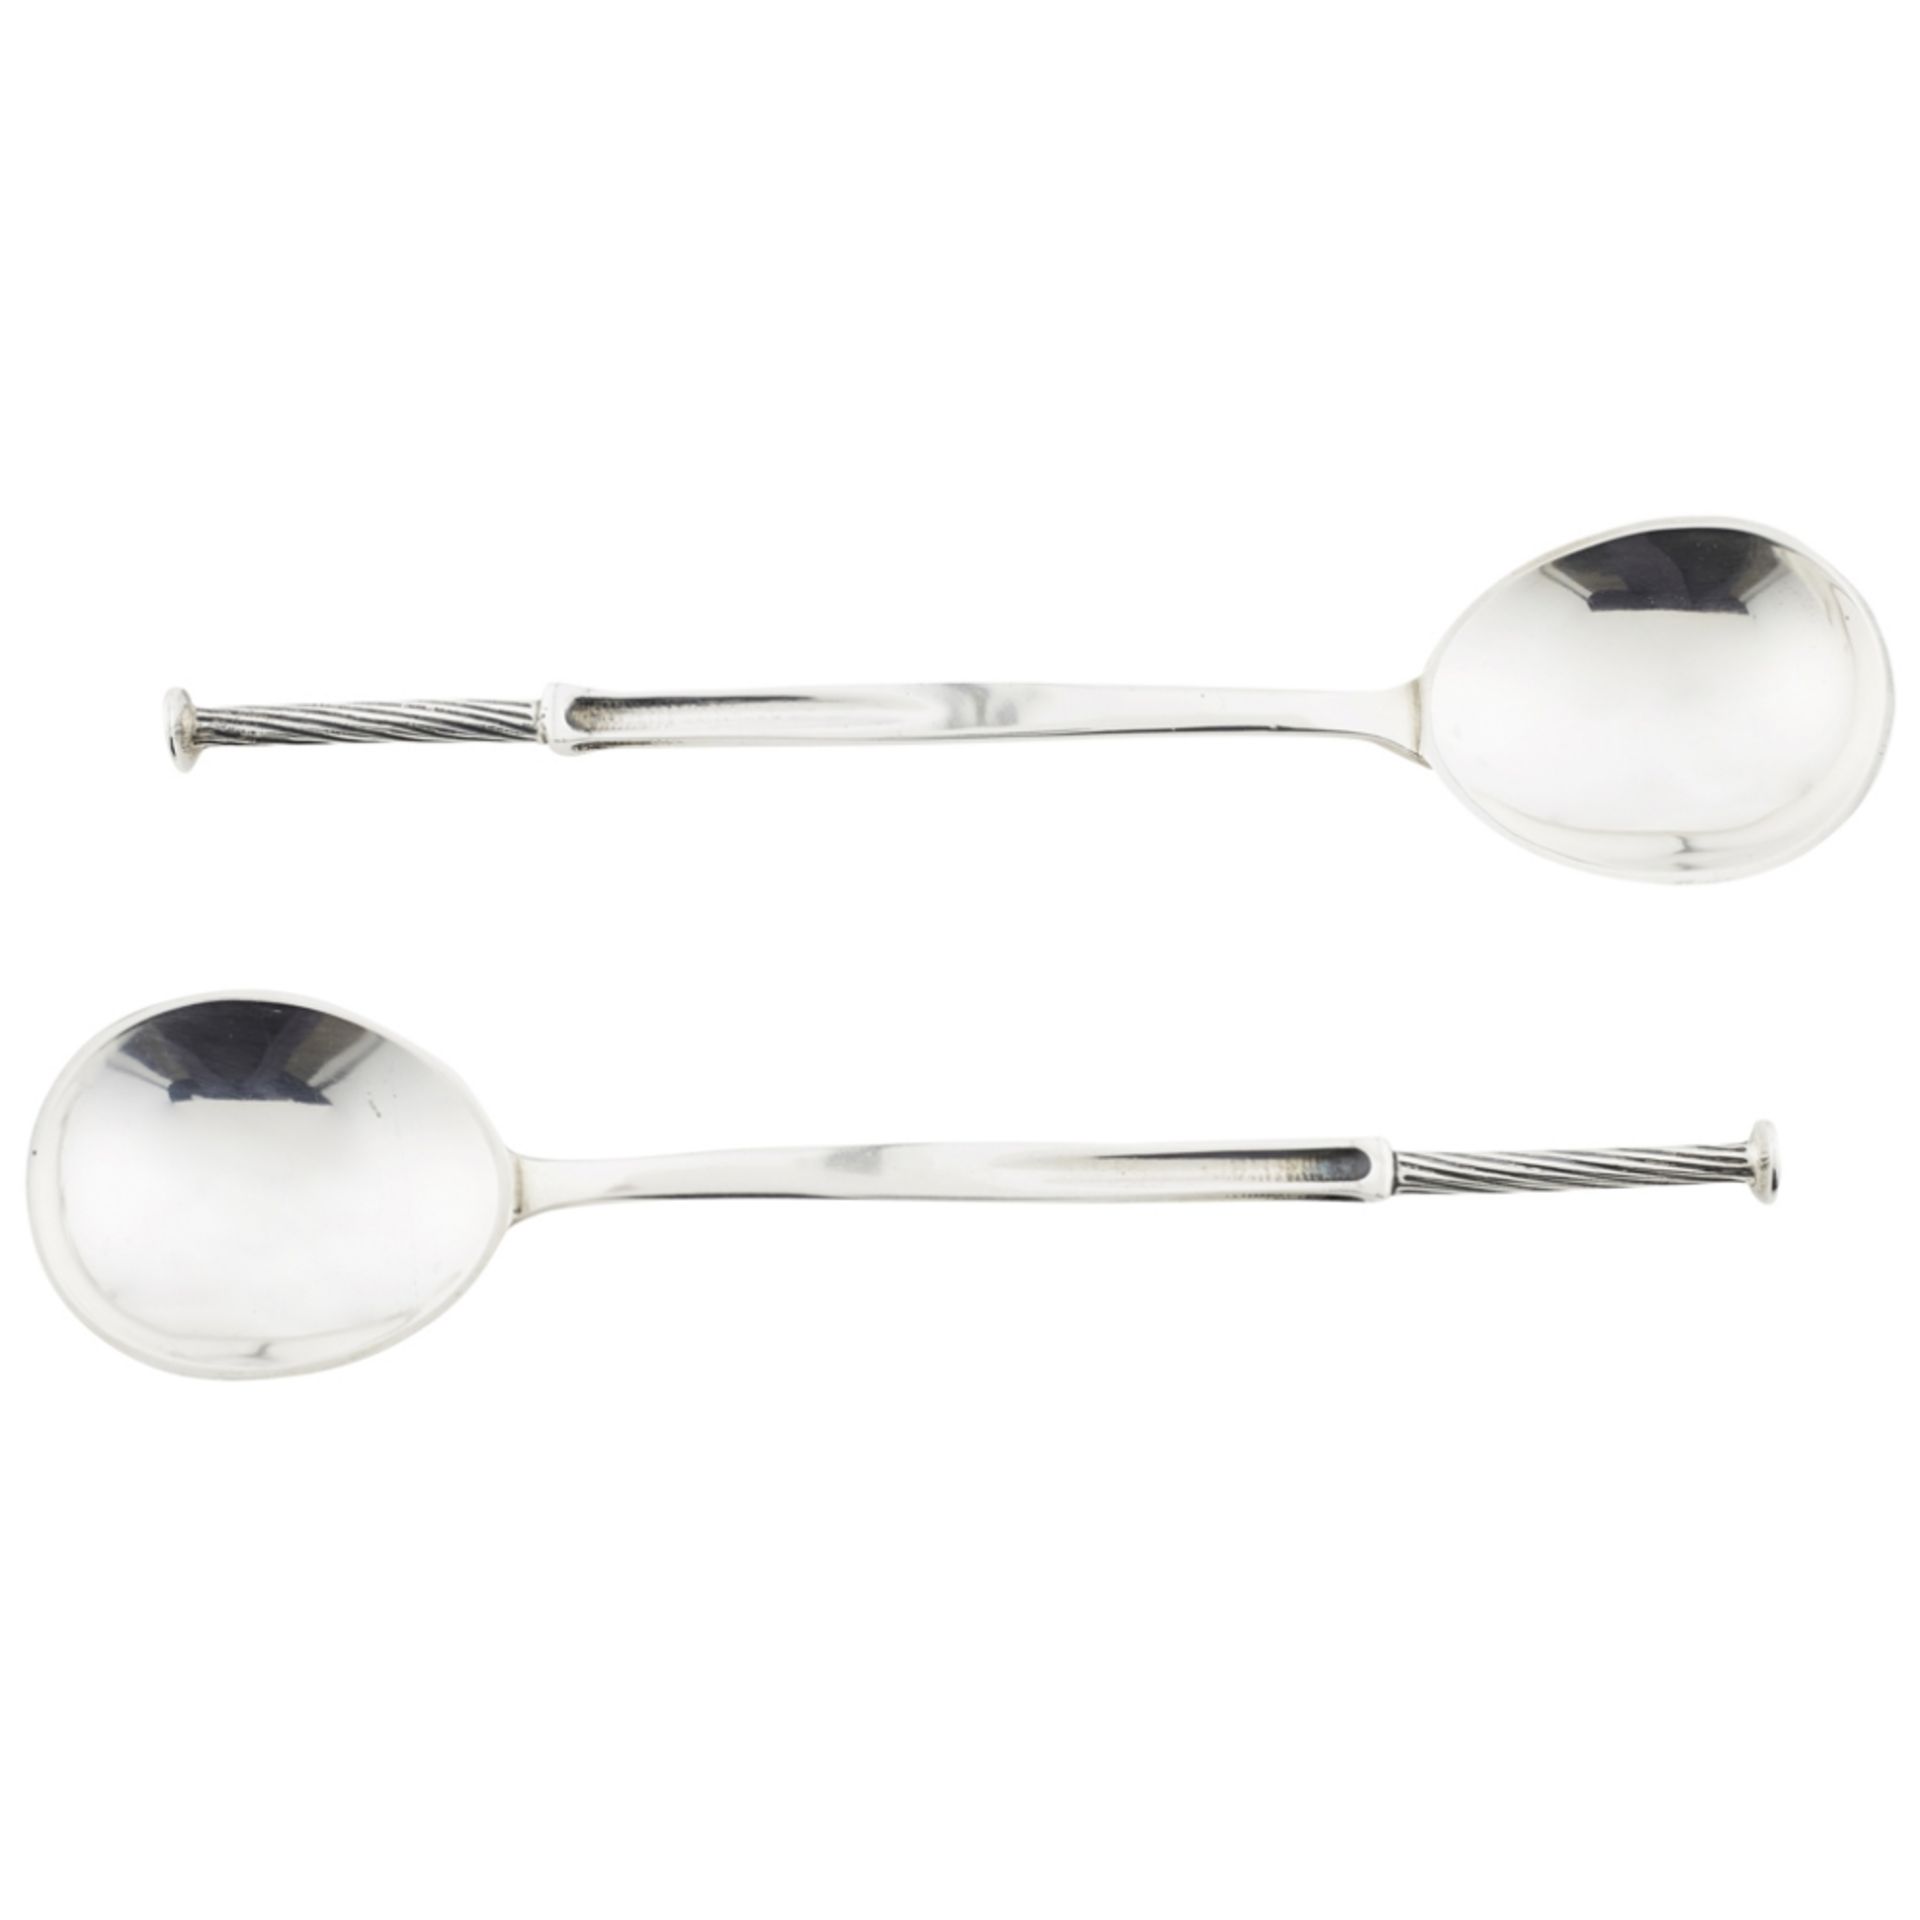 LIBERTY & CO., LONDON PAIR OF 'CYMRIC' SERVING SPOONS, BIRMINGHAM 1902 each with ovoid bowl,